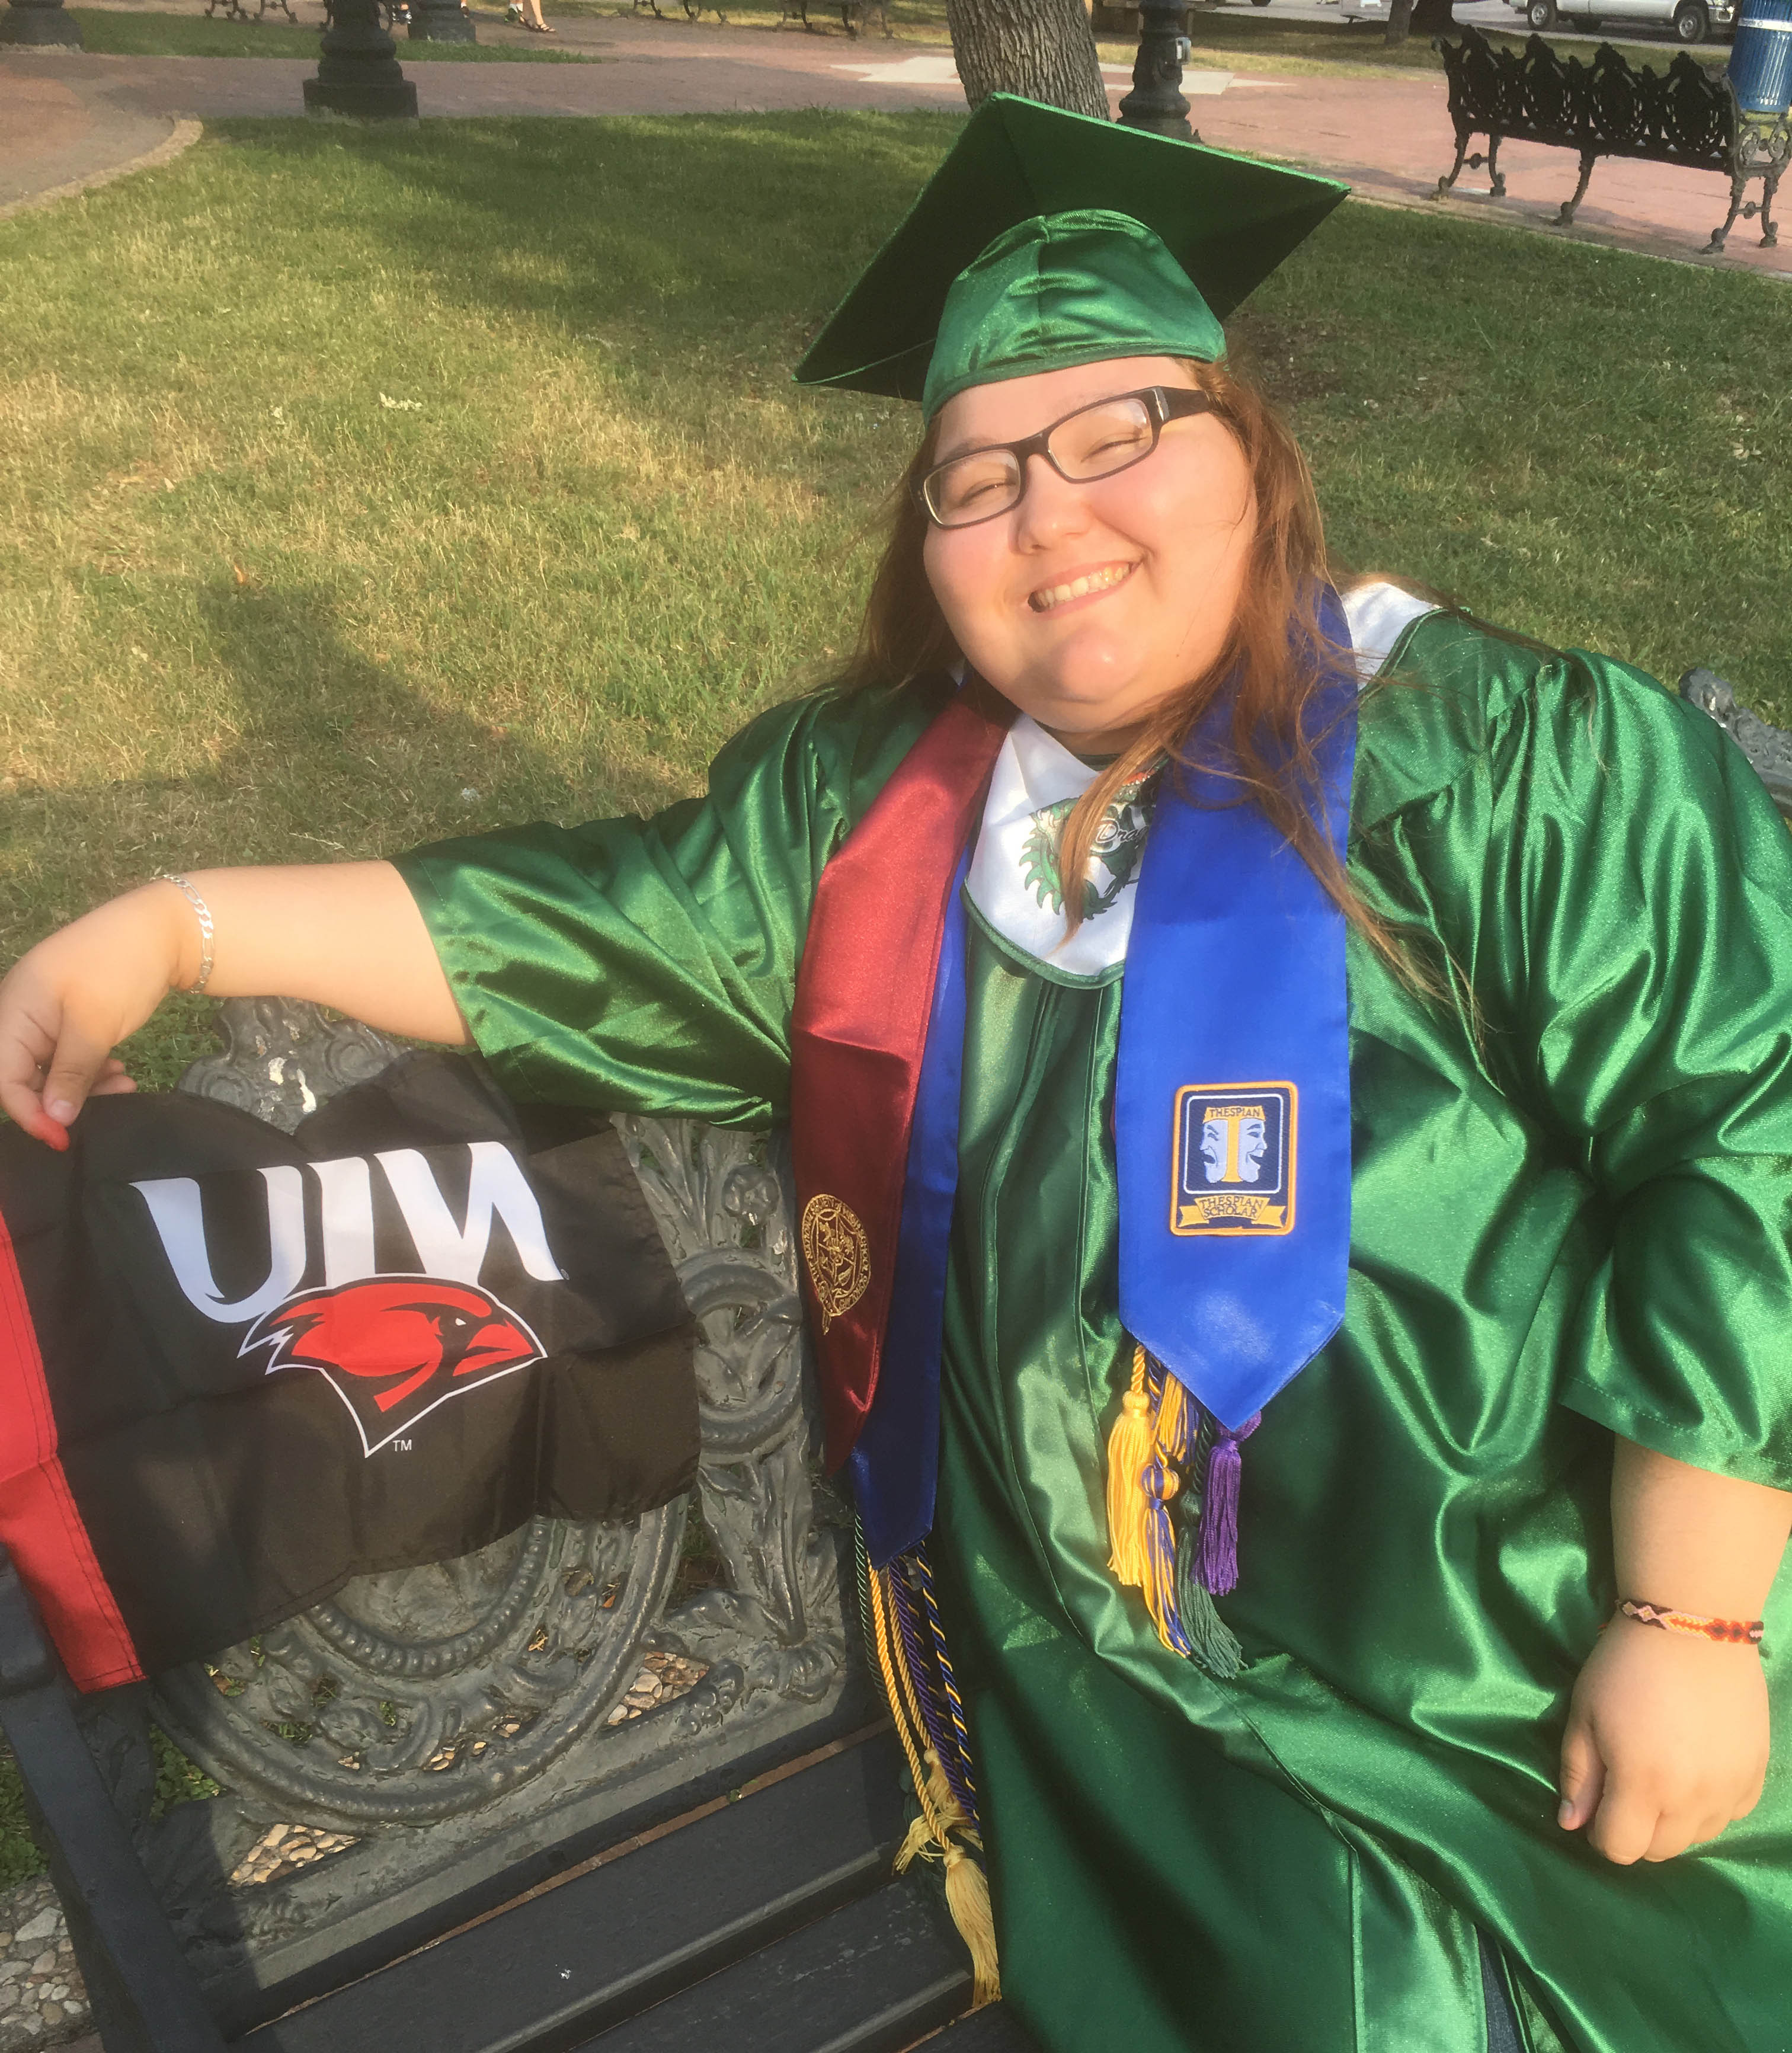 A student poses for a photo in a cap and gown next to a UIW flag